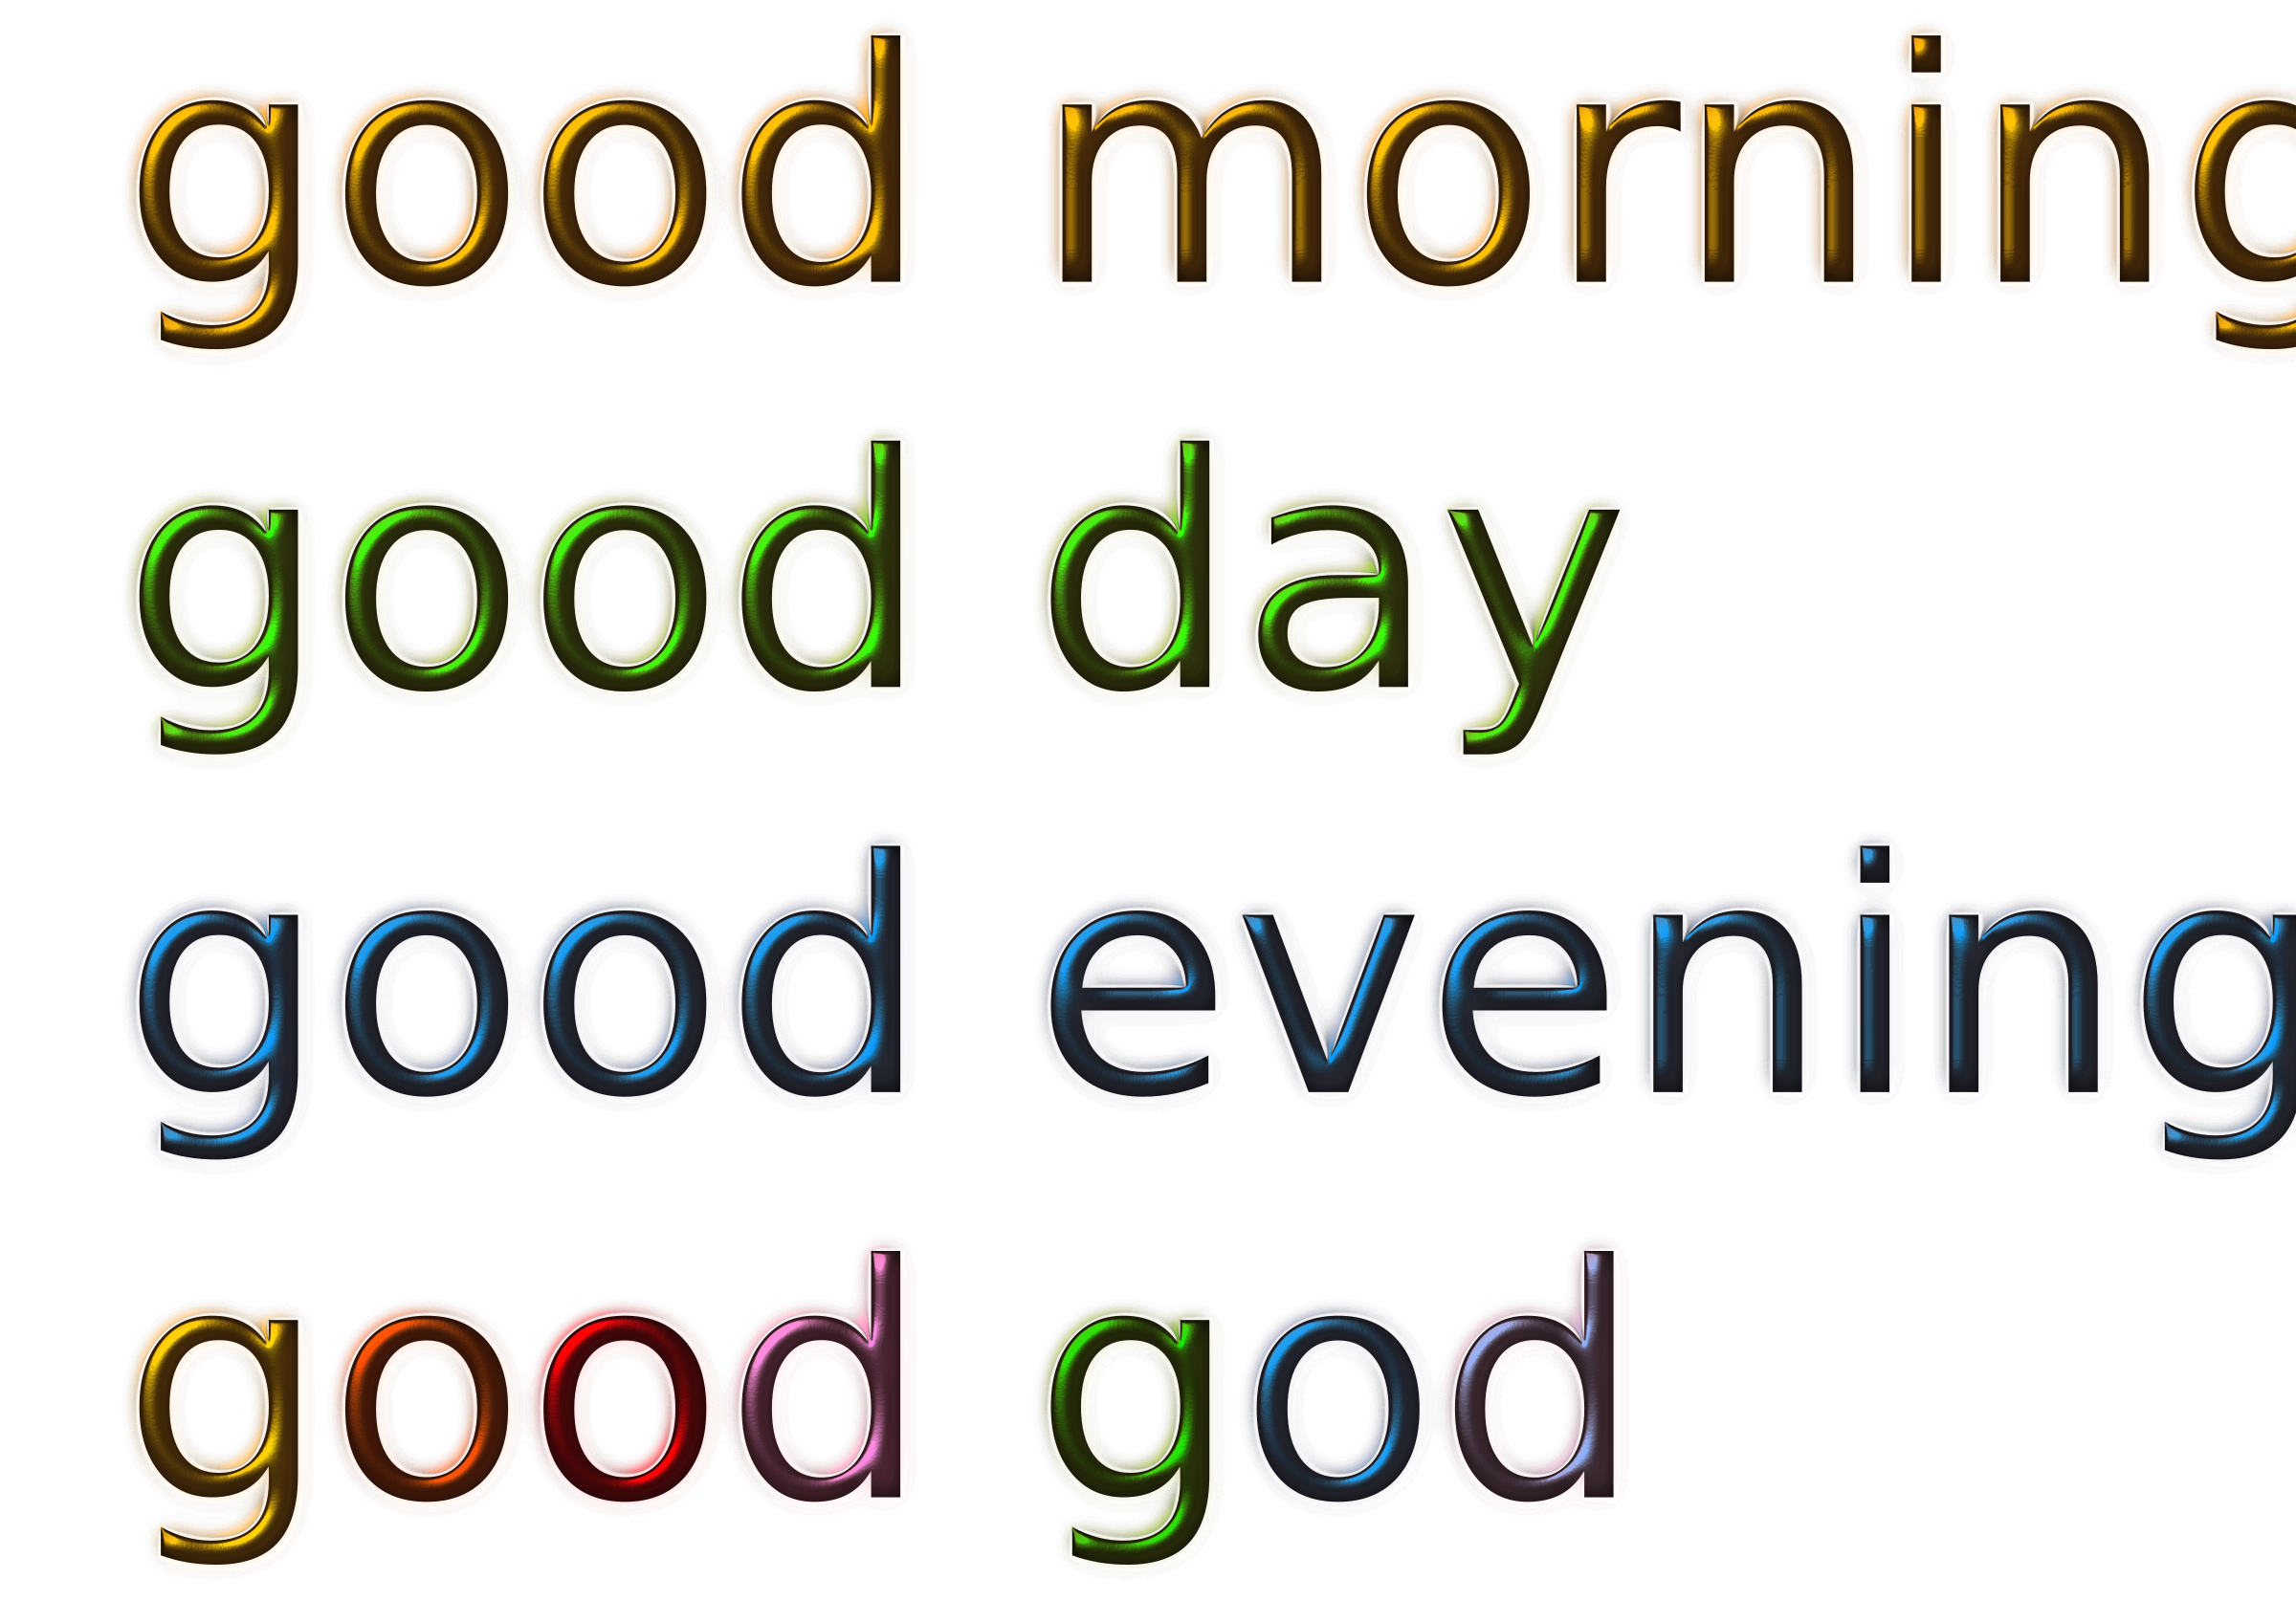 clipart of good morning - photo #46